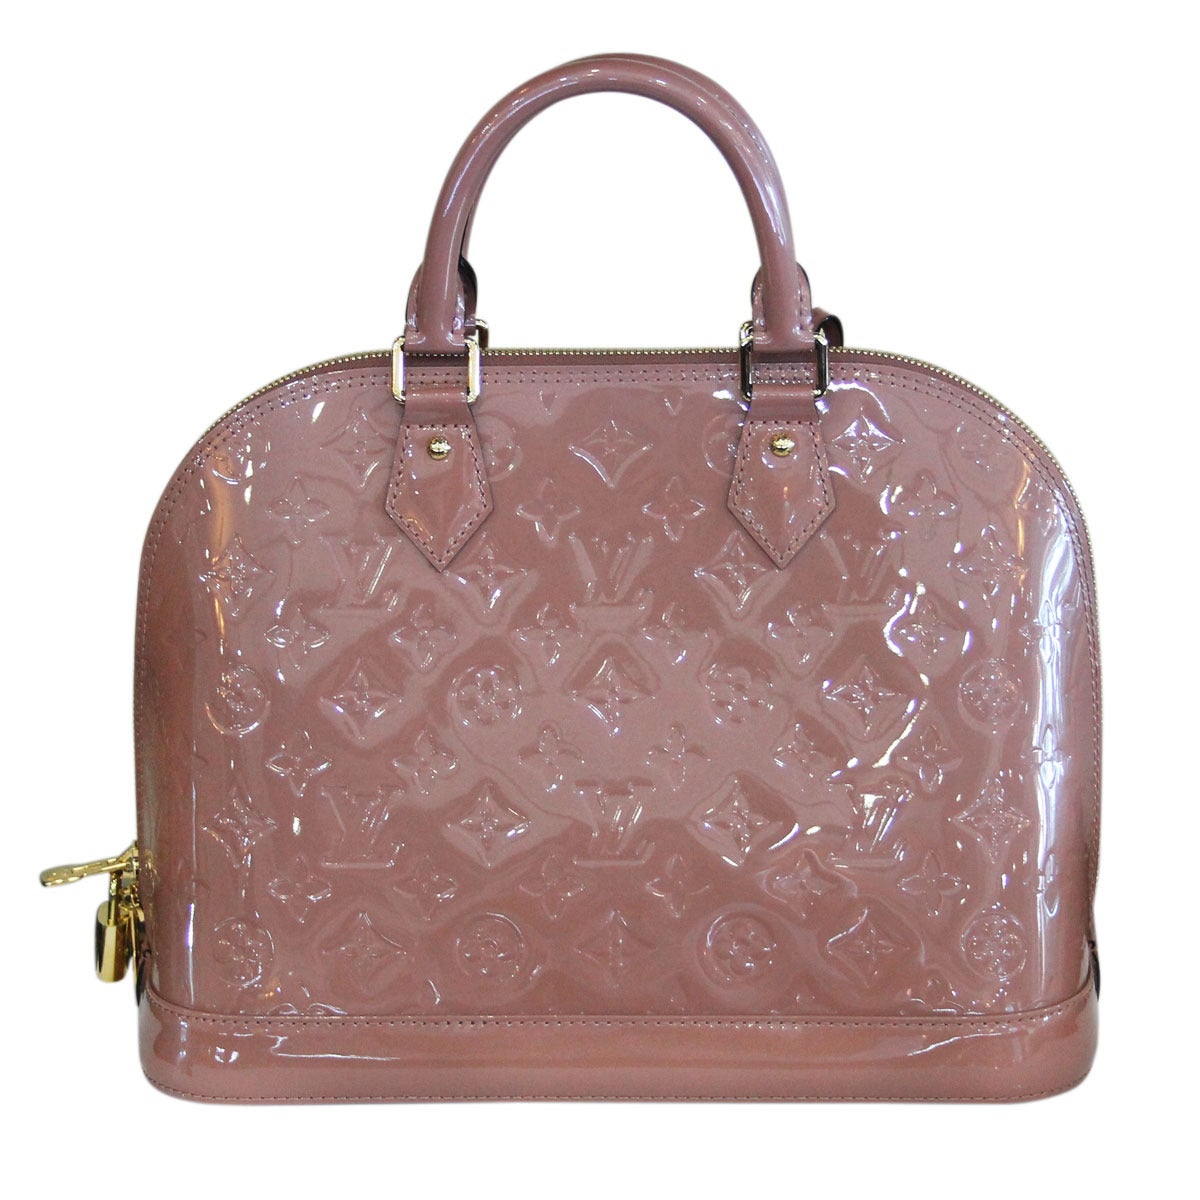 Brand: Louis Vuitton
Handles: Rose Vernis Leather Rolled Handles; Drop: 3.25